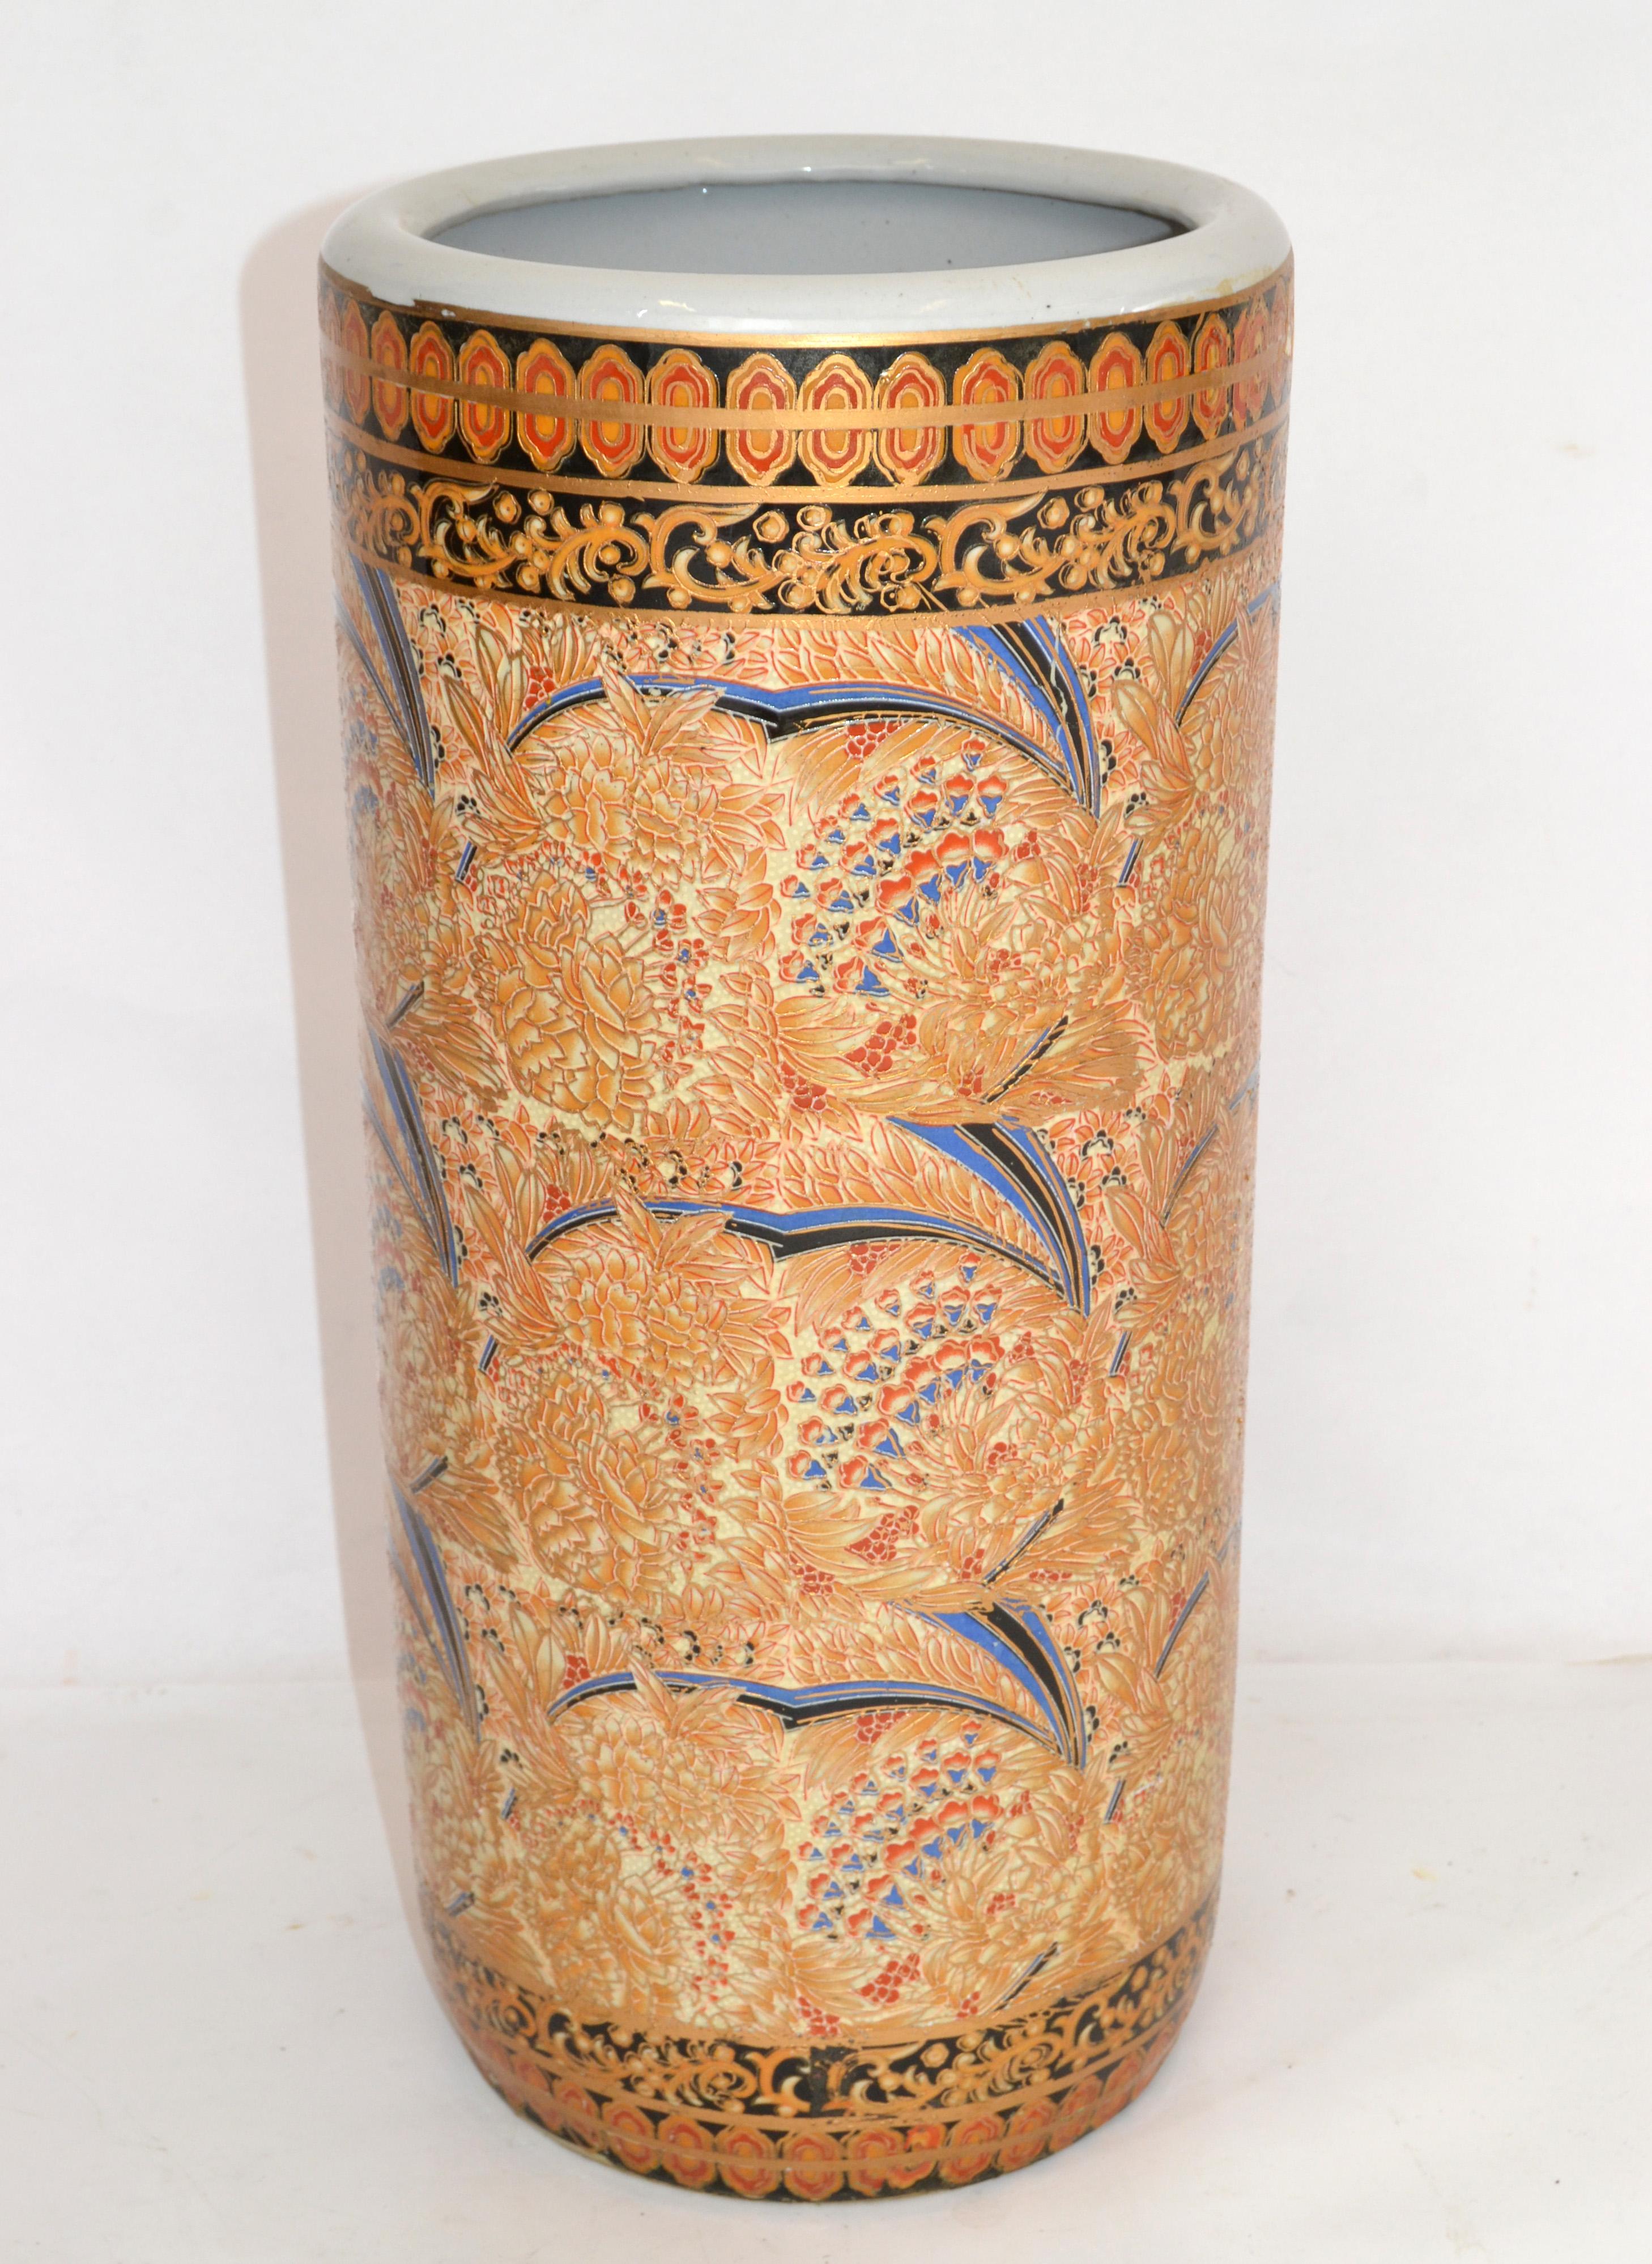 We offer a Chinoiserie Style Gold, Black, Orange handmade ceramic pottery Umbrella Stand, Baluster, Vase, Vessel.
Interesting pattern of lines and geometric shapes.
Can be used indoor and outdoor.


